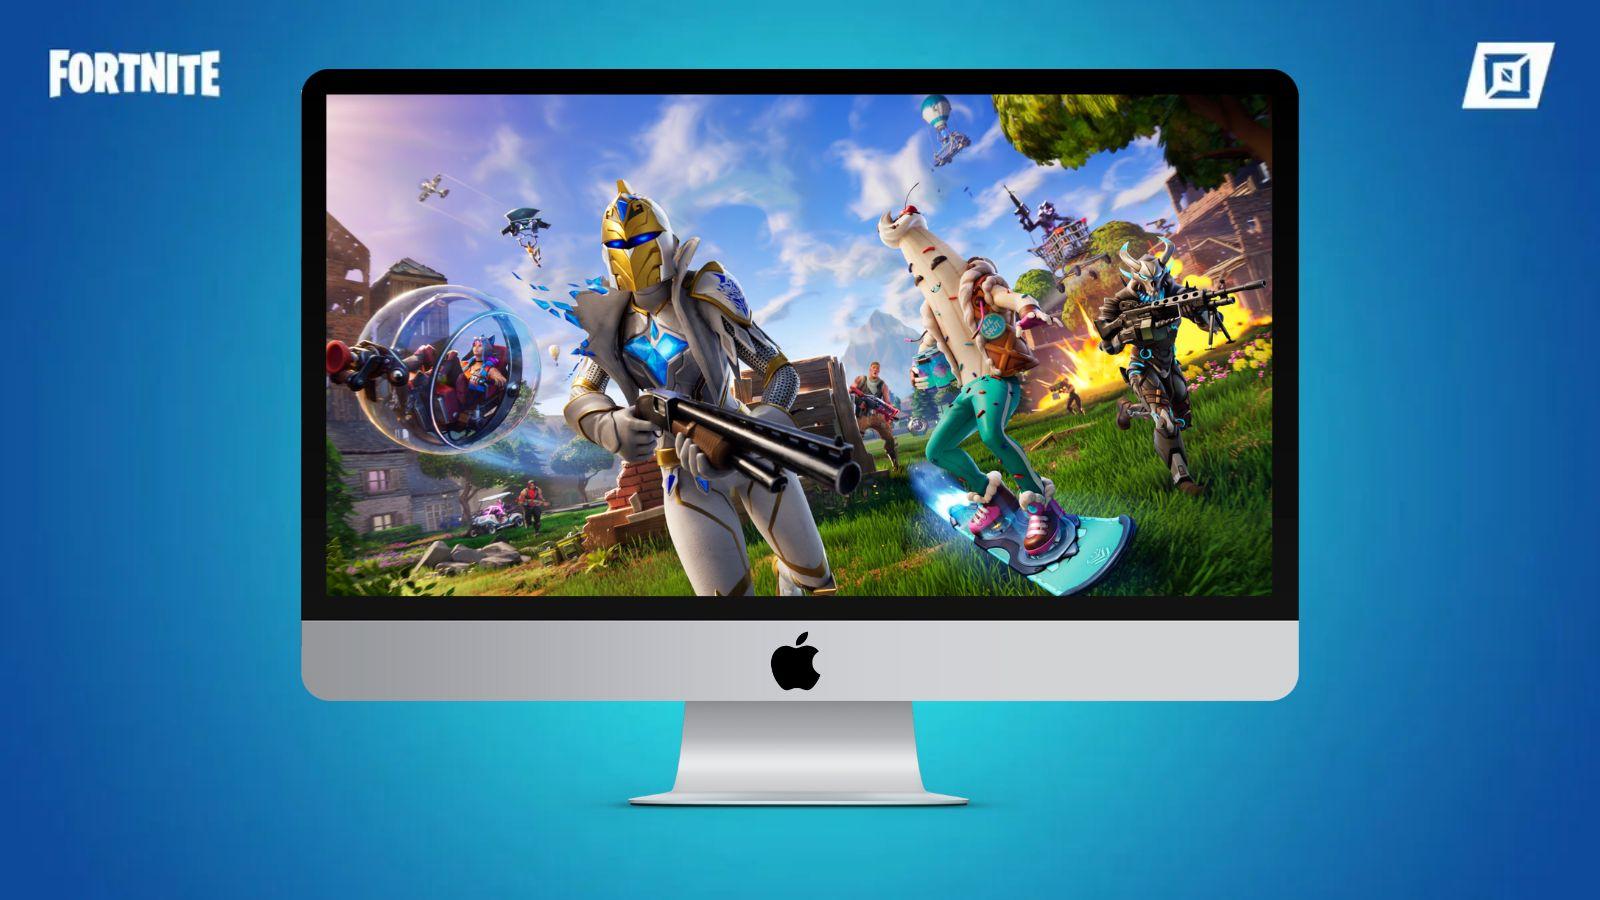 Can Fortnite be played on MAc